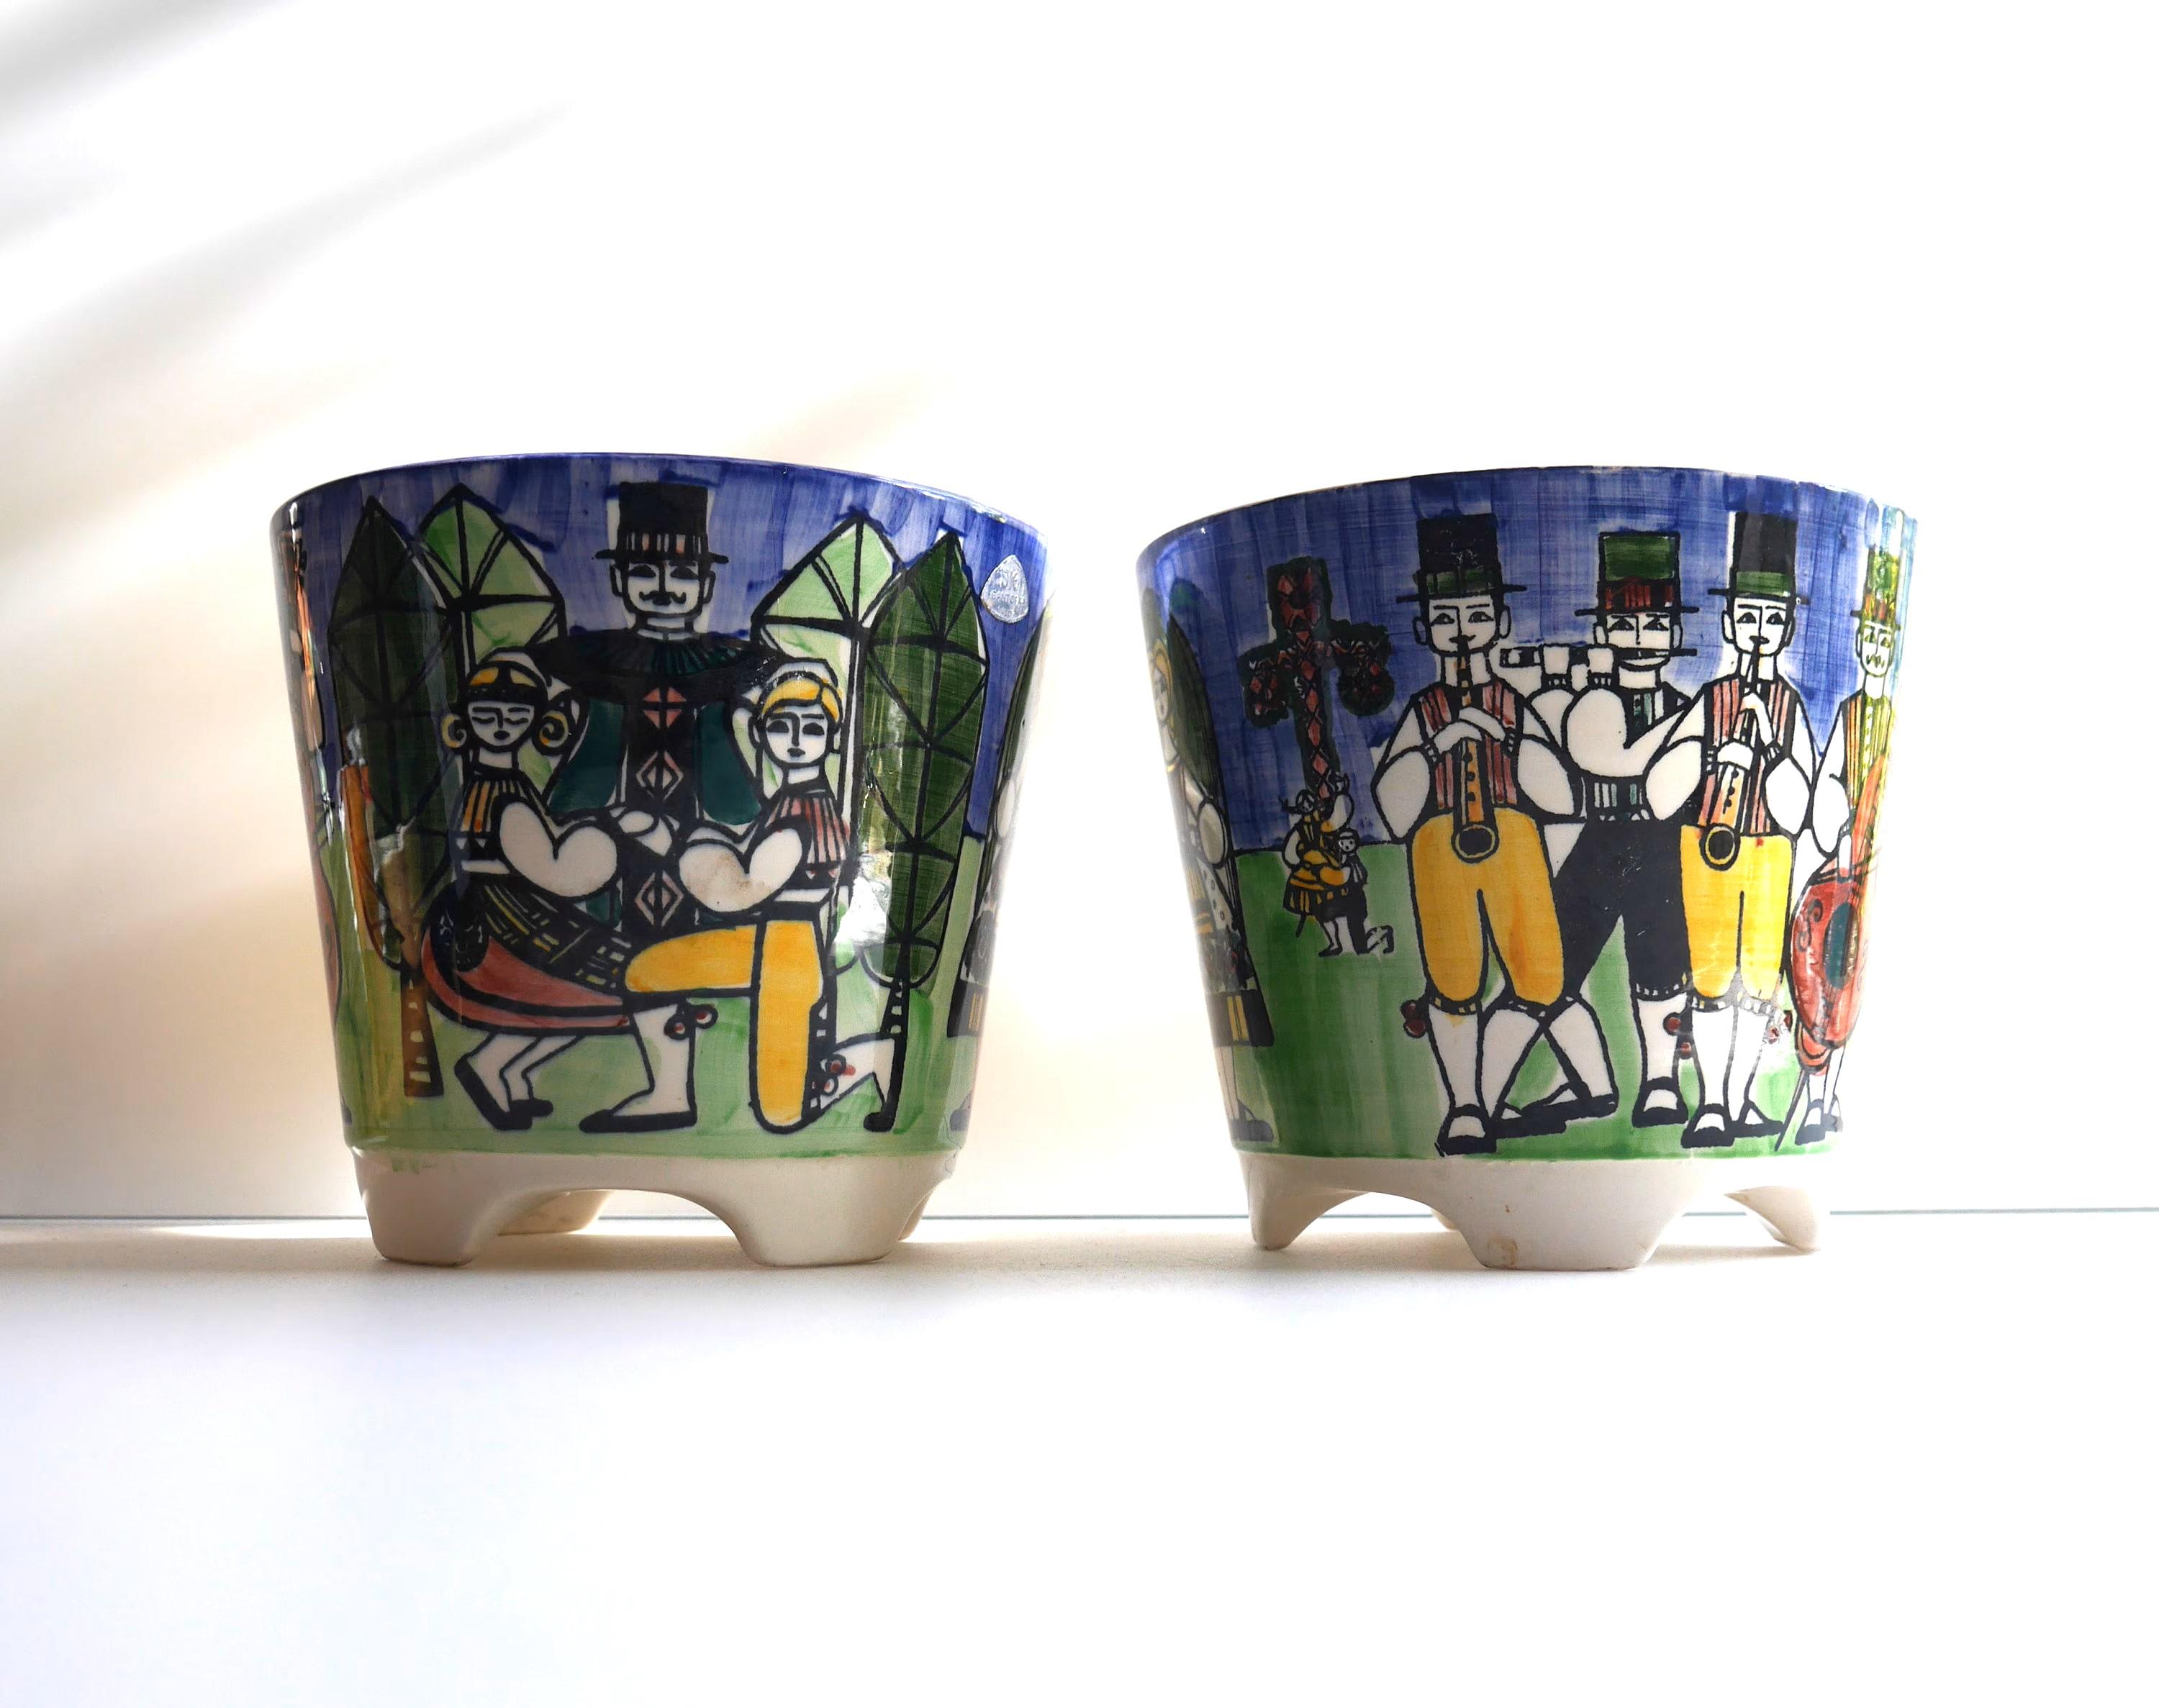 A pair of very nice hand painted vintage porcelain flowerpots made by Anita Nylund for JIE Keramik, Sweden. These pots have fantastic colors depicting a traditional Swedish midsummer dance. There are men and women dancing and playing music in